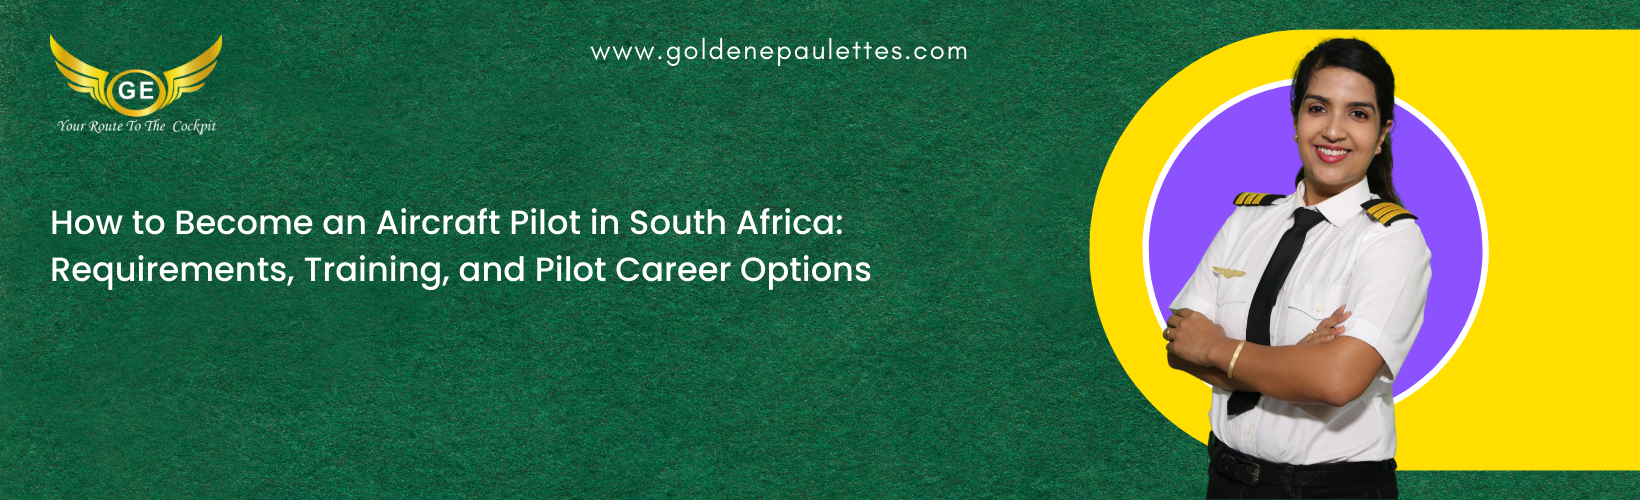 How to Become an Aircraft Pilot in South Africa